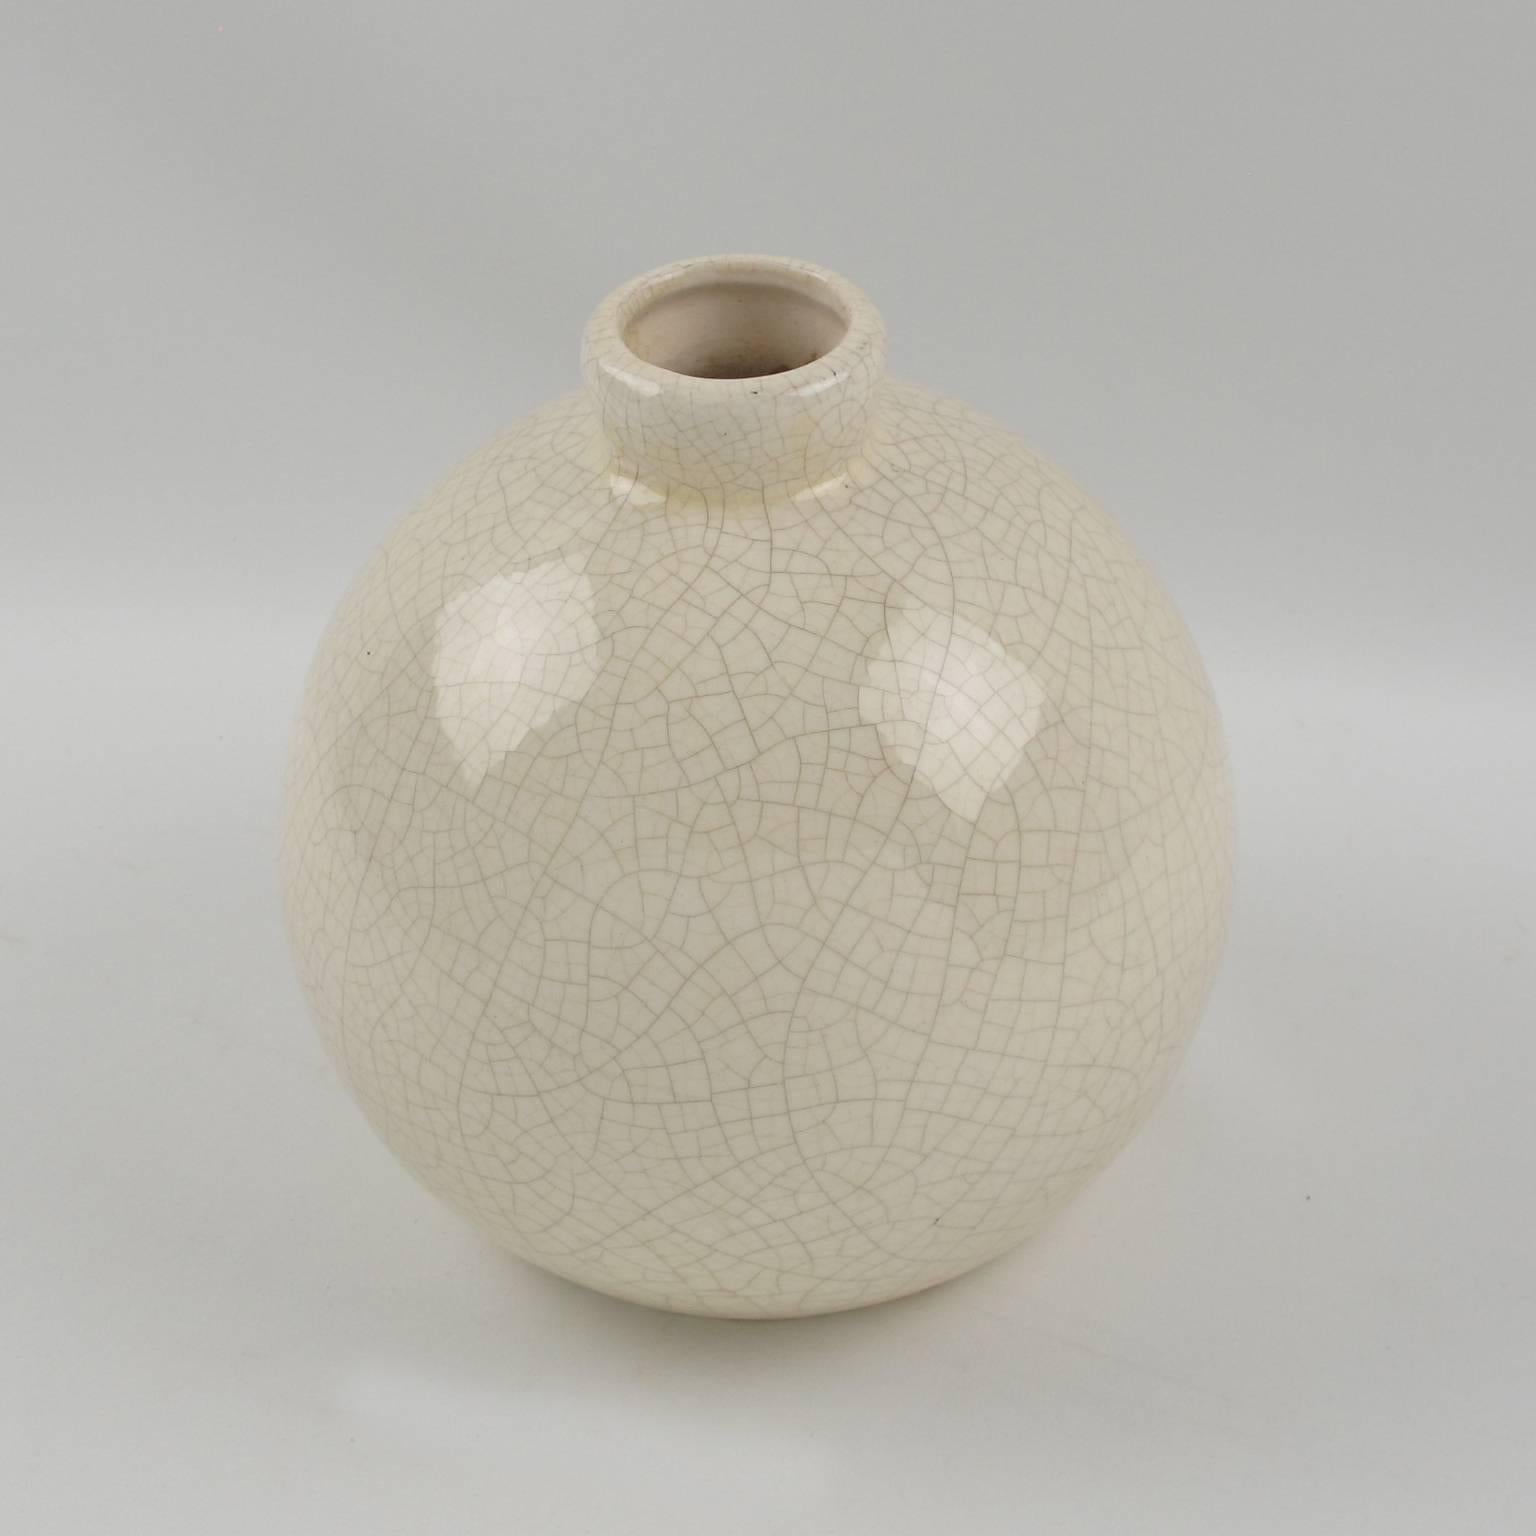 Art Deco vase by Saint-Clement, France. Ceramic vase with off-white crackle glaze finish. Features a round streamline design with tiny collar opening. Engraved model number underside. The crackle clear glaze was a popular technique for animal and